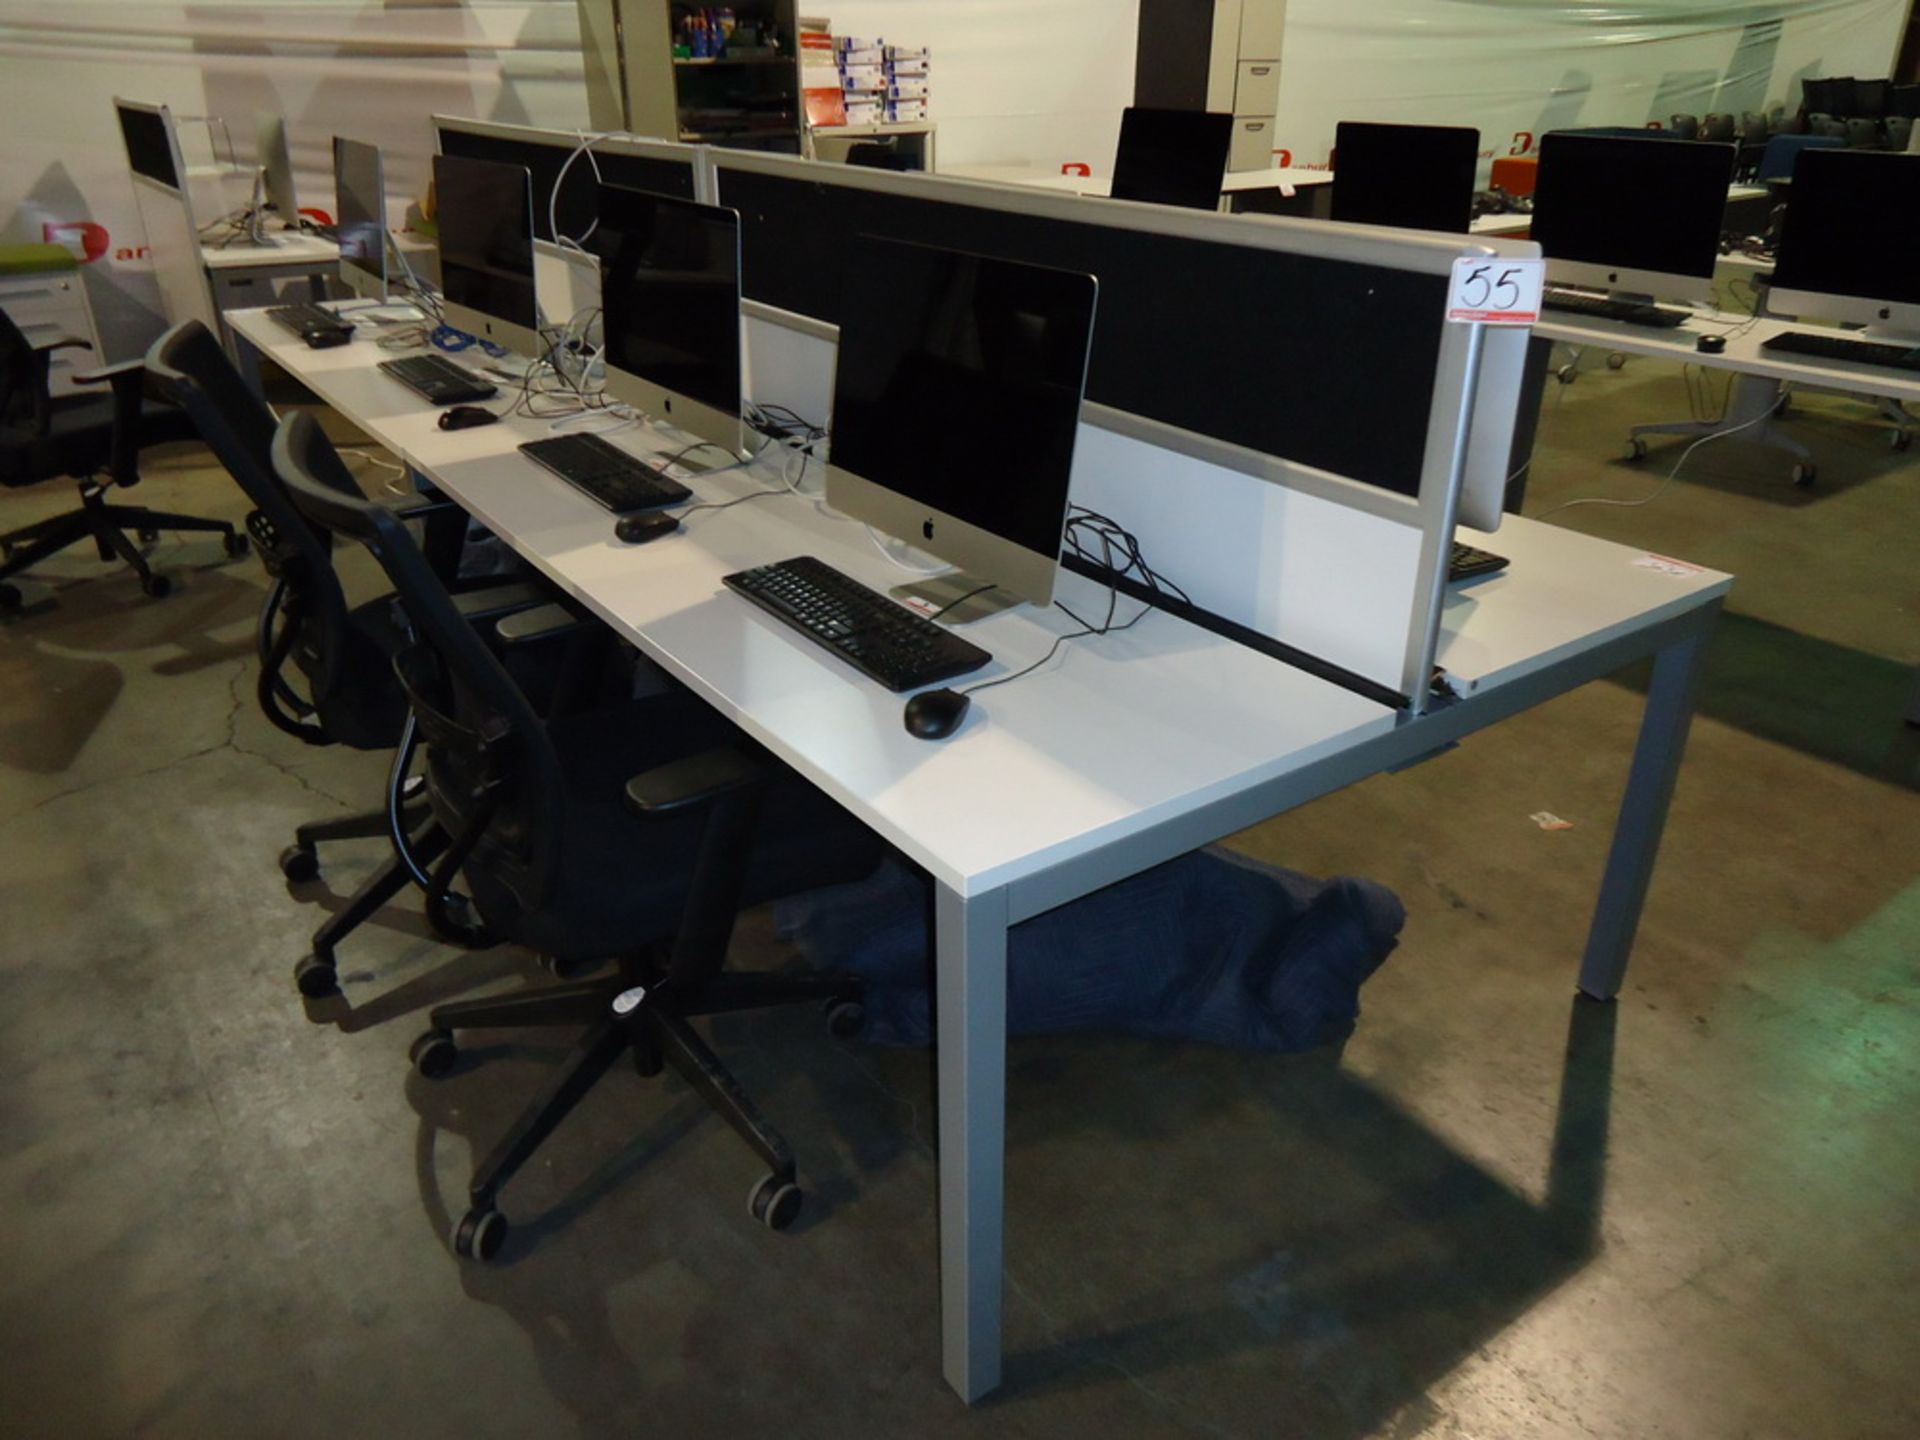 WHITE & GREY APPROX 52" X 142" 2-SIDED WORKSTATION TABLE W/ DIVIDER